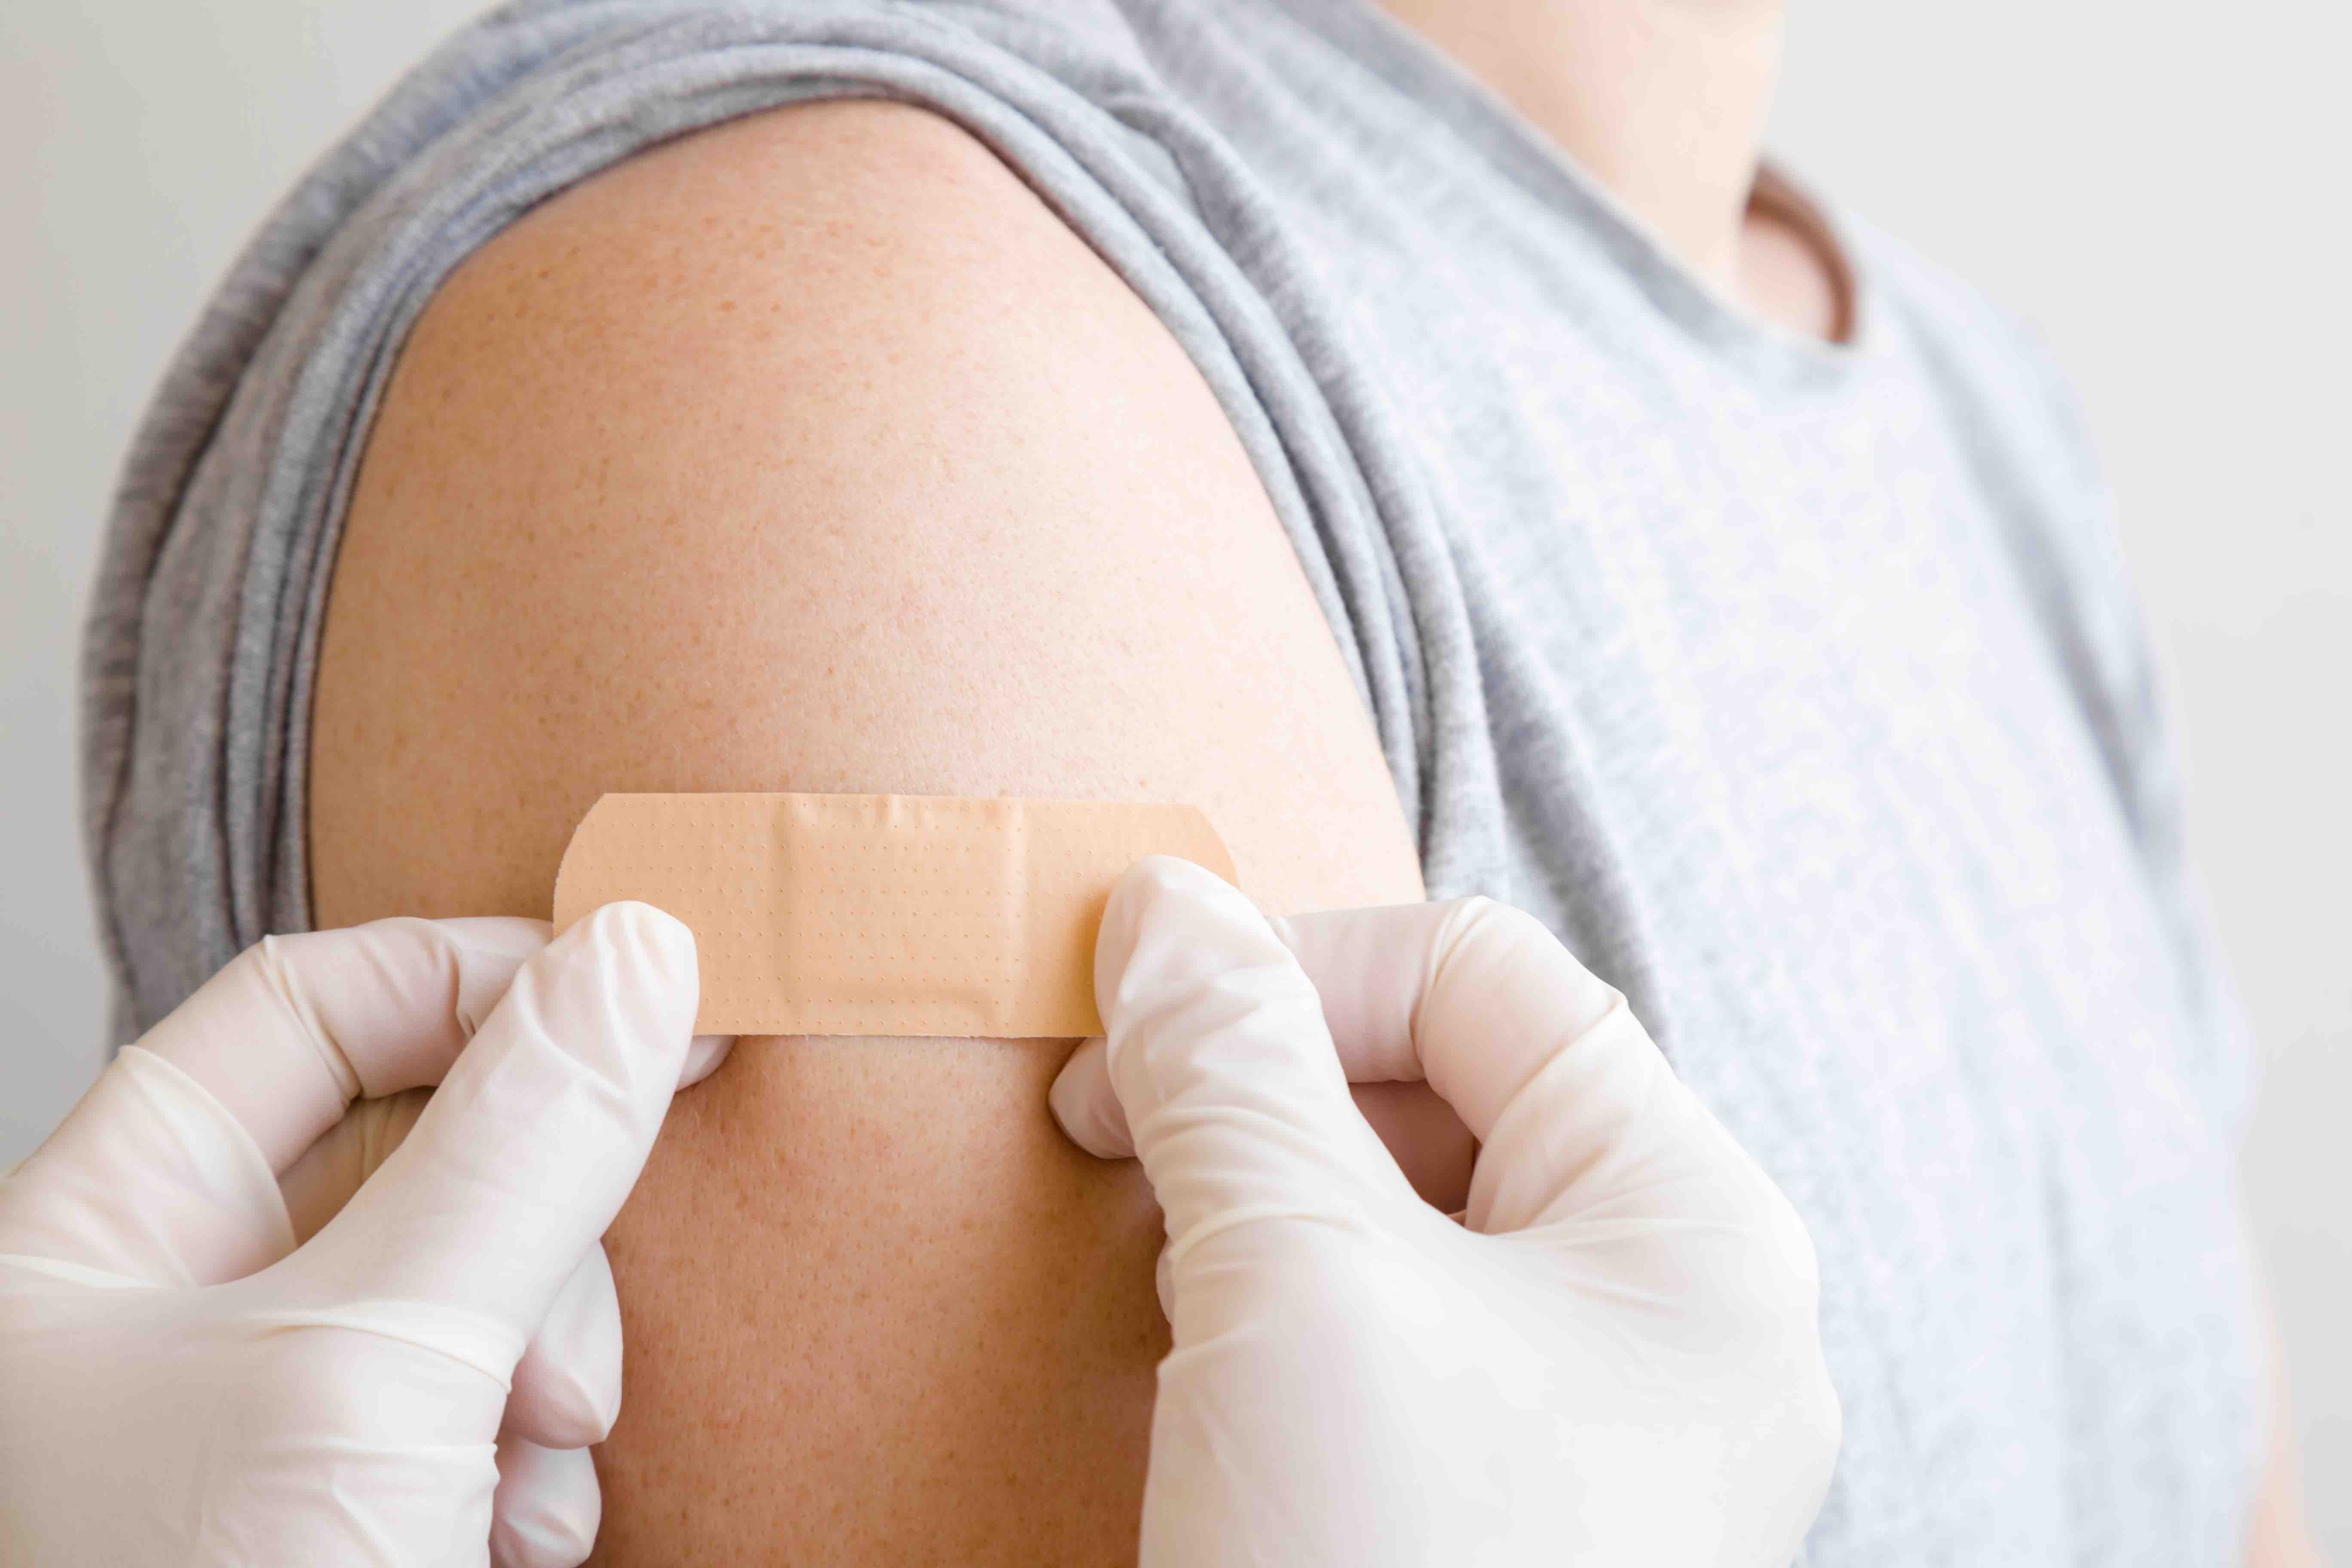 Skin Immunization May Reduce Risk of Sexually Transmitted Infections